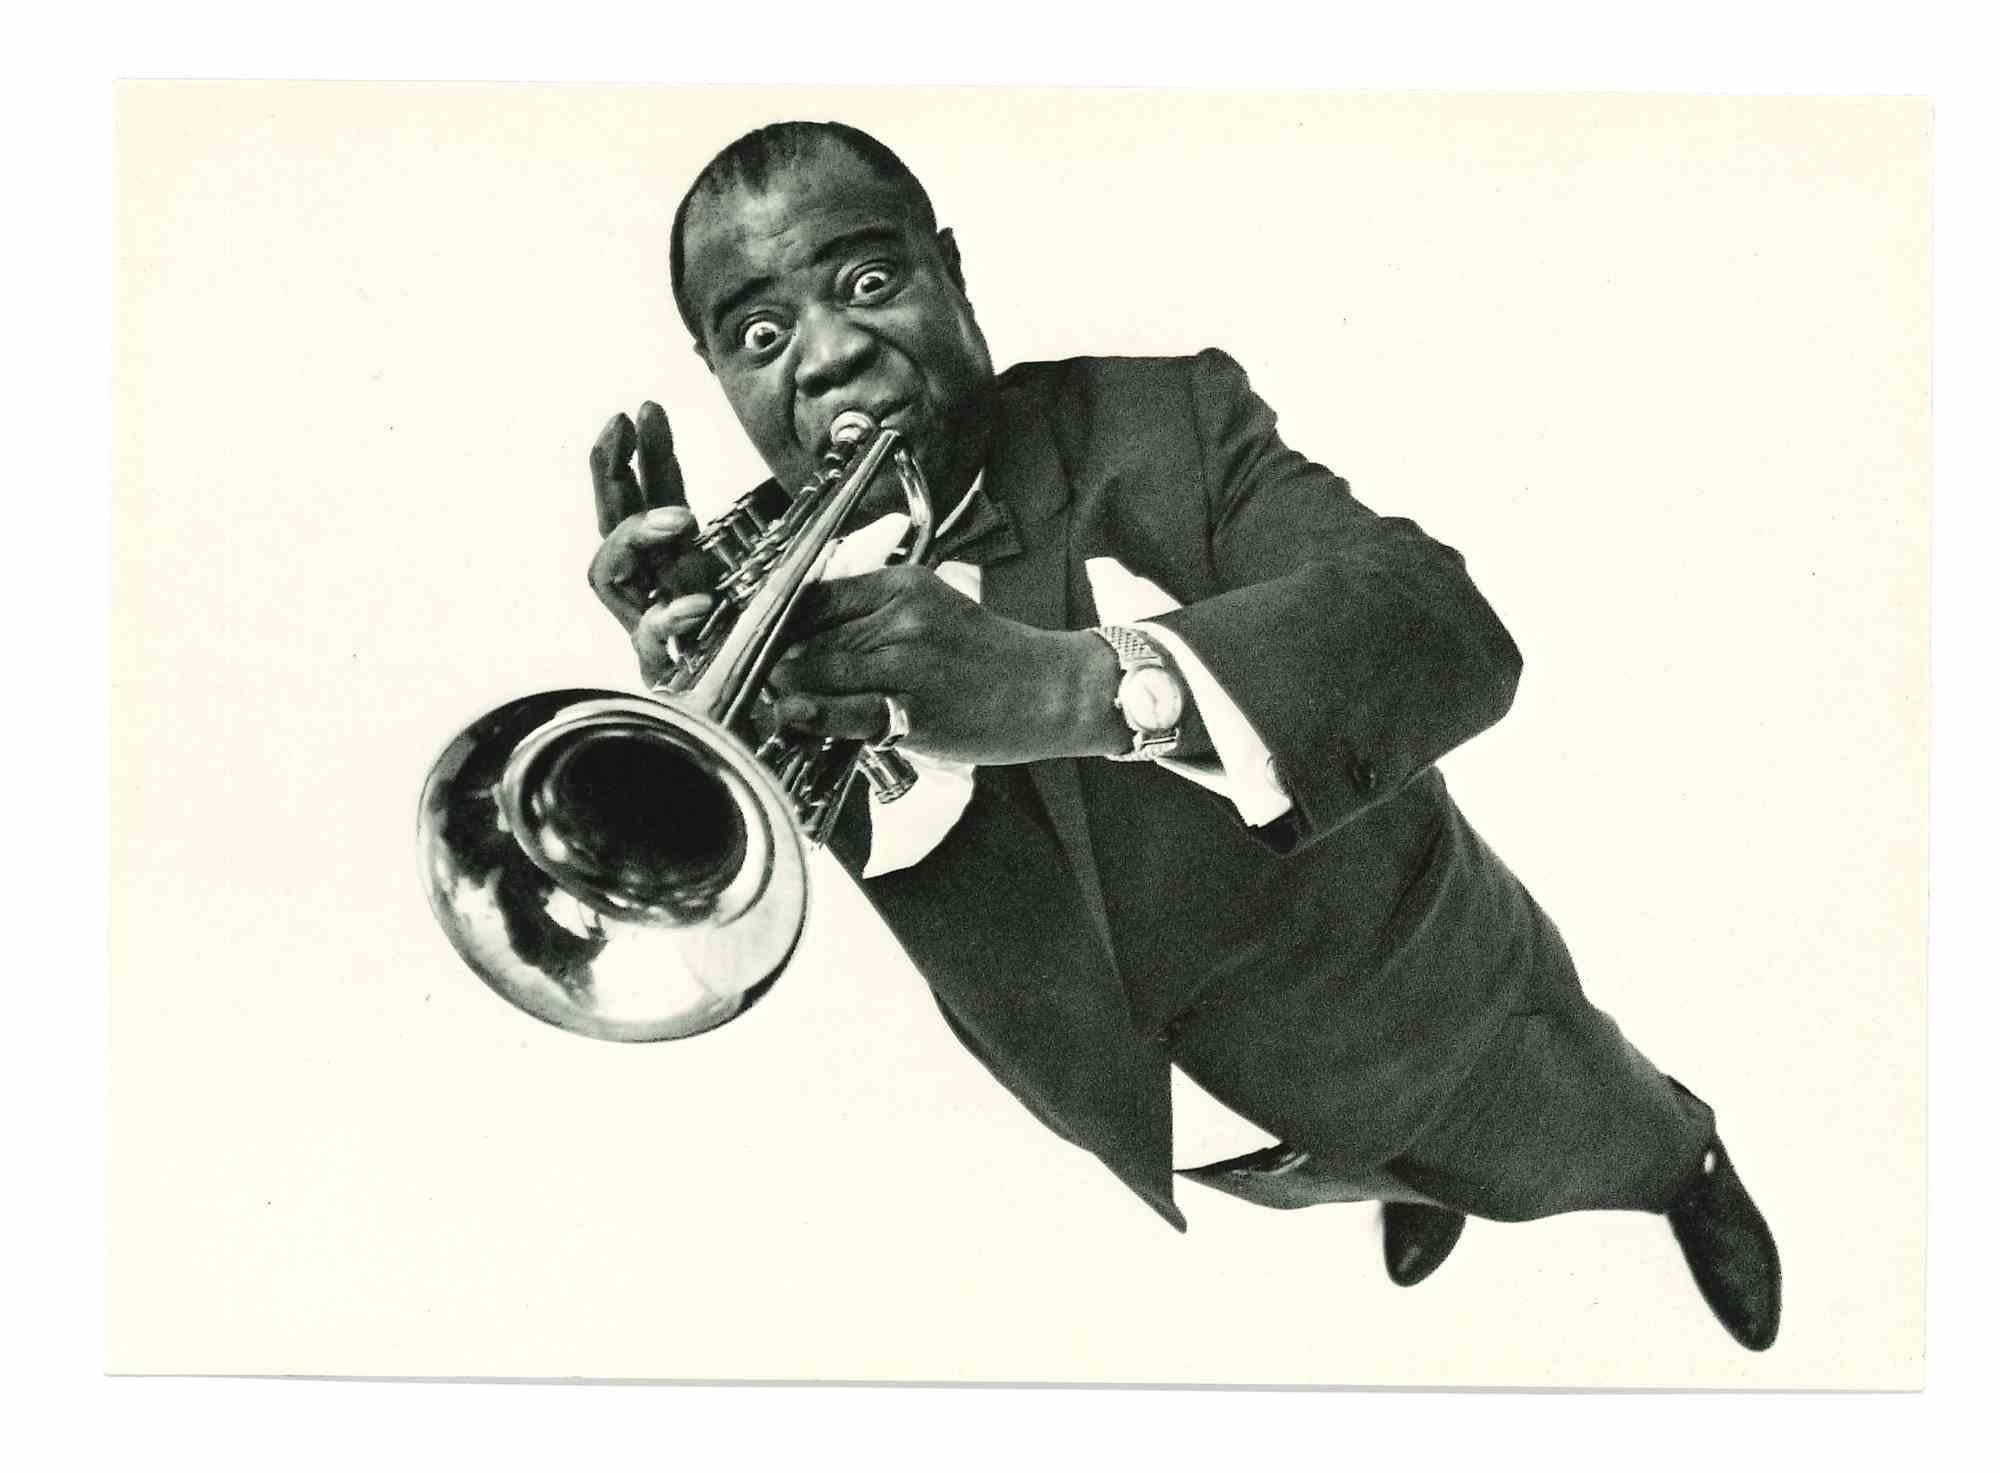 Unknown Portrait Photograph - Louis Armstrong in 1966 - Postcard - 1966